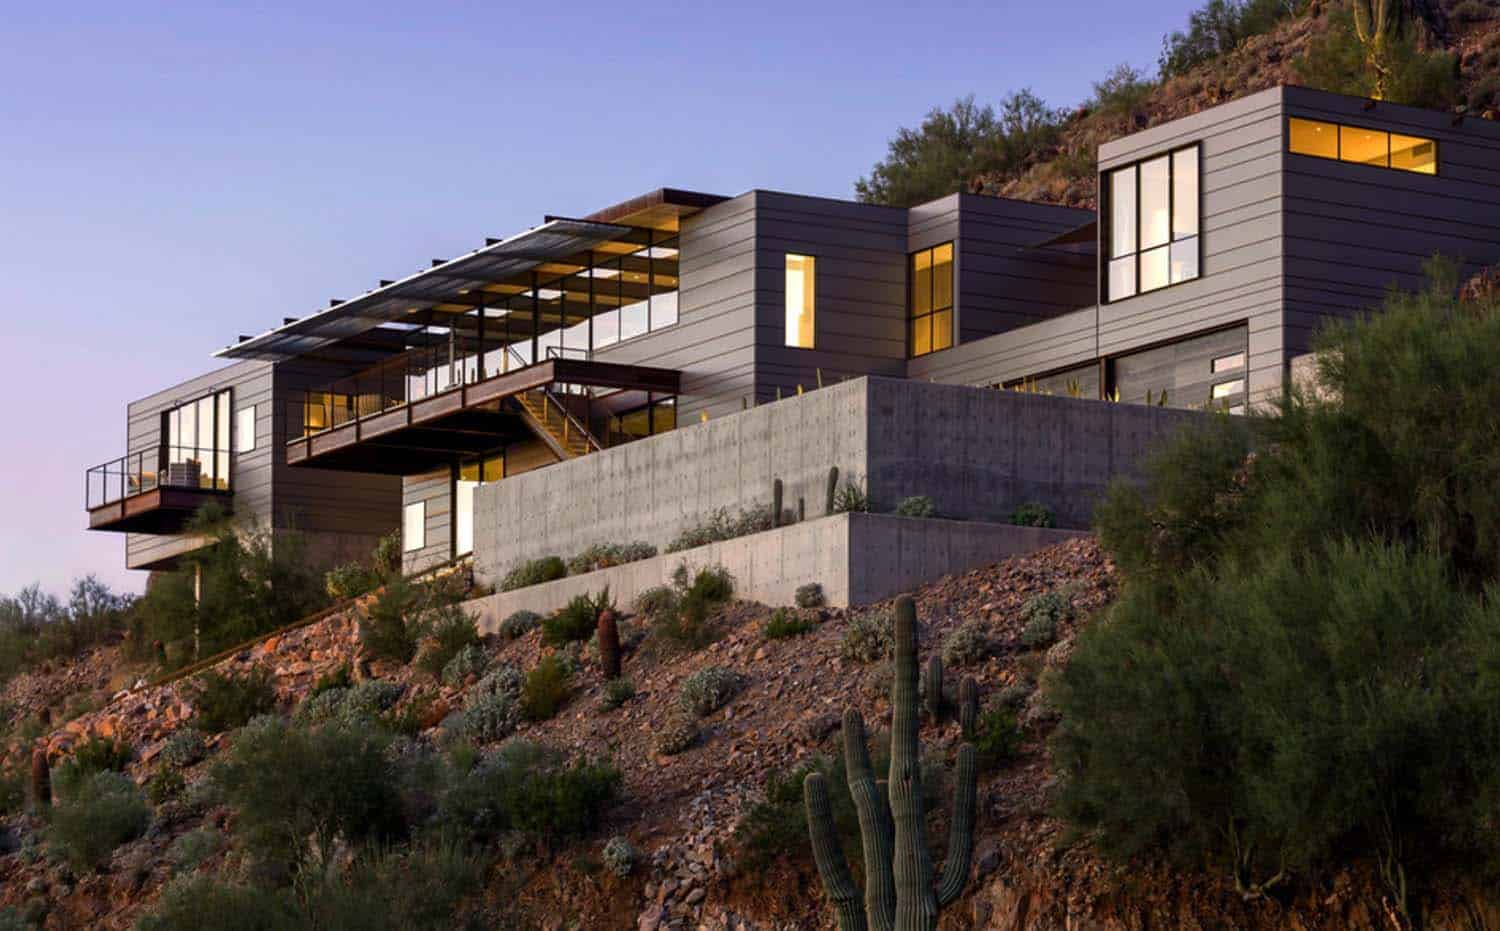 Concrete, glass and steel structure hovers above Arizona desert